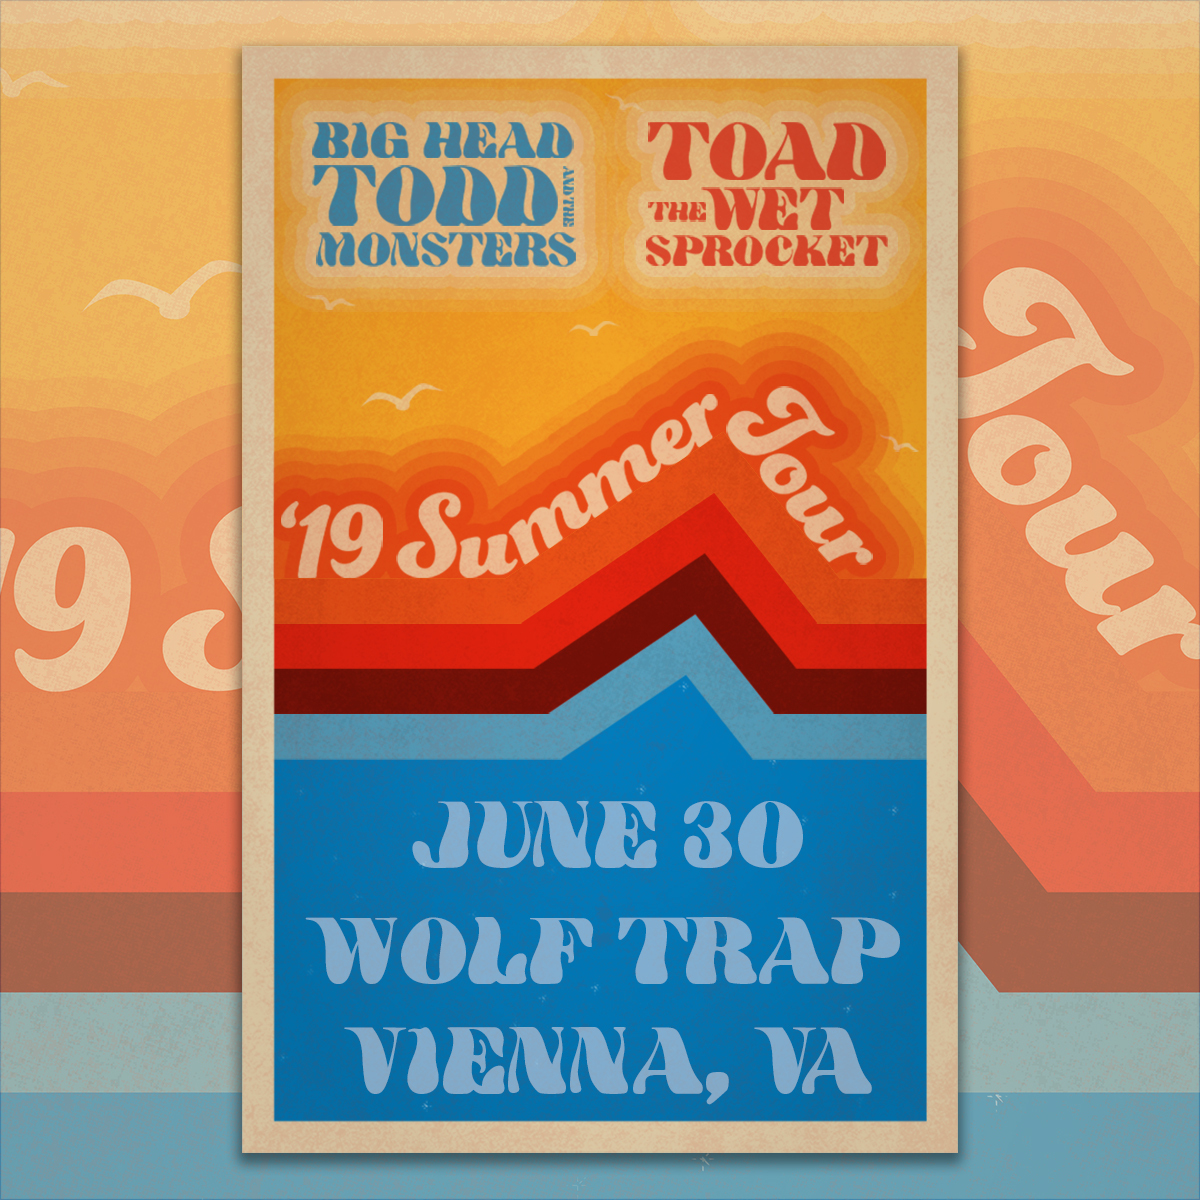 Just Announced: Wolf Trap on June 30!